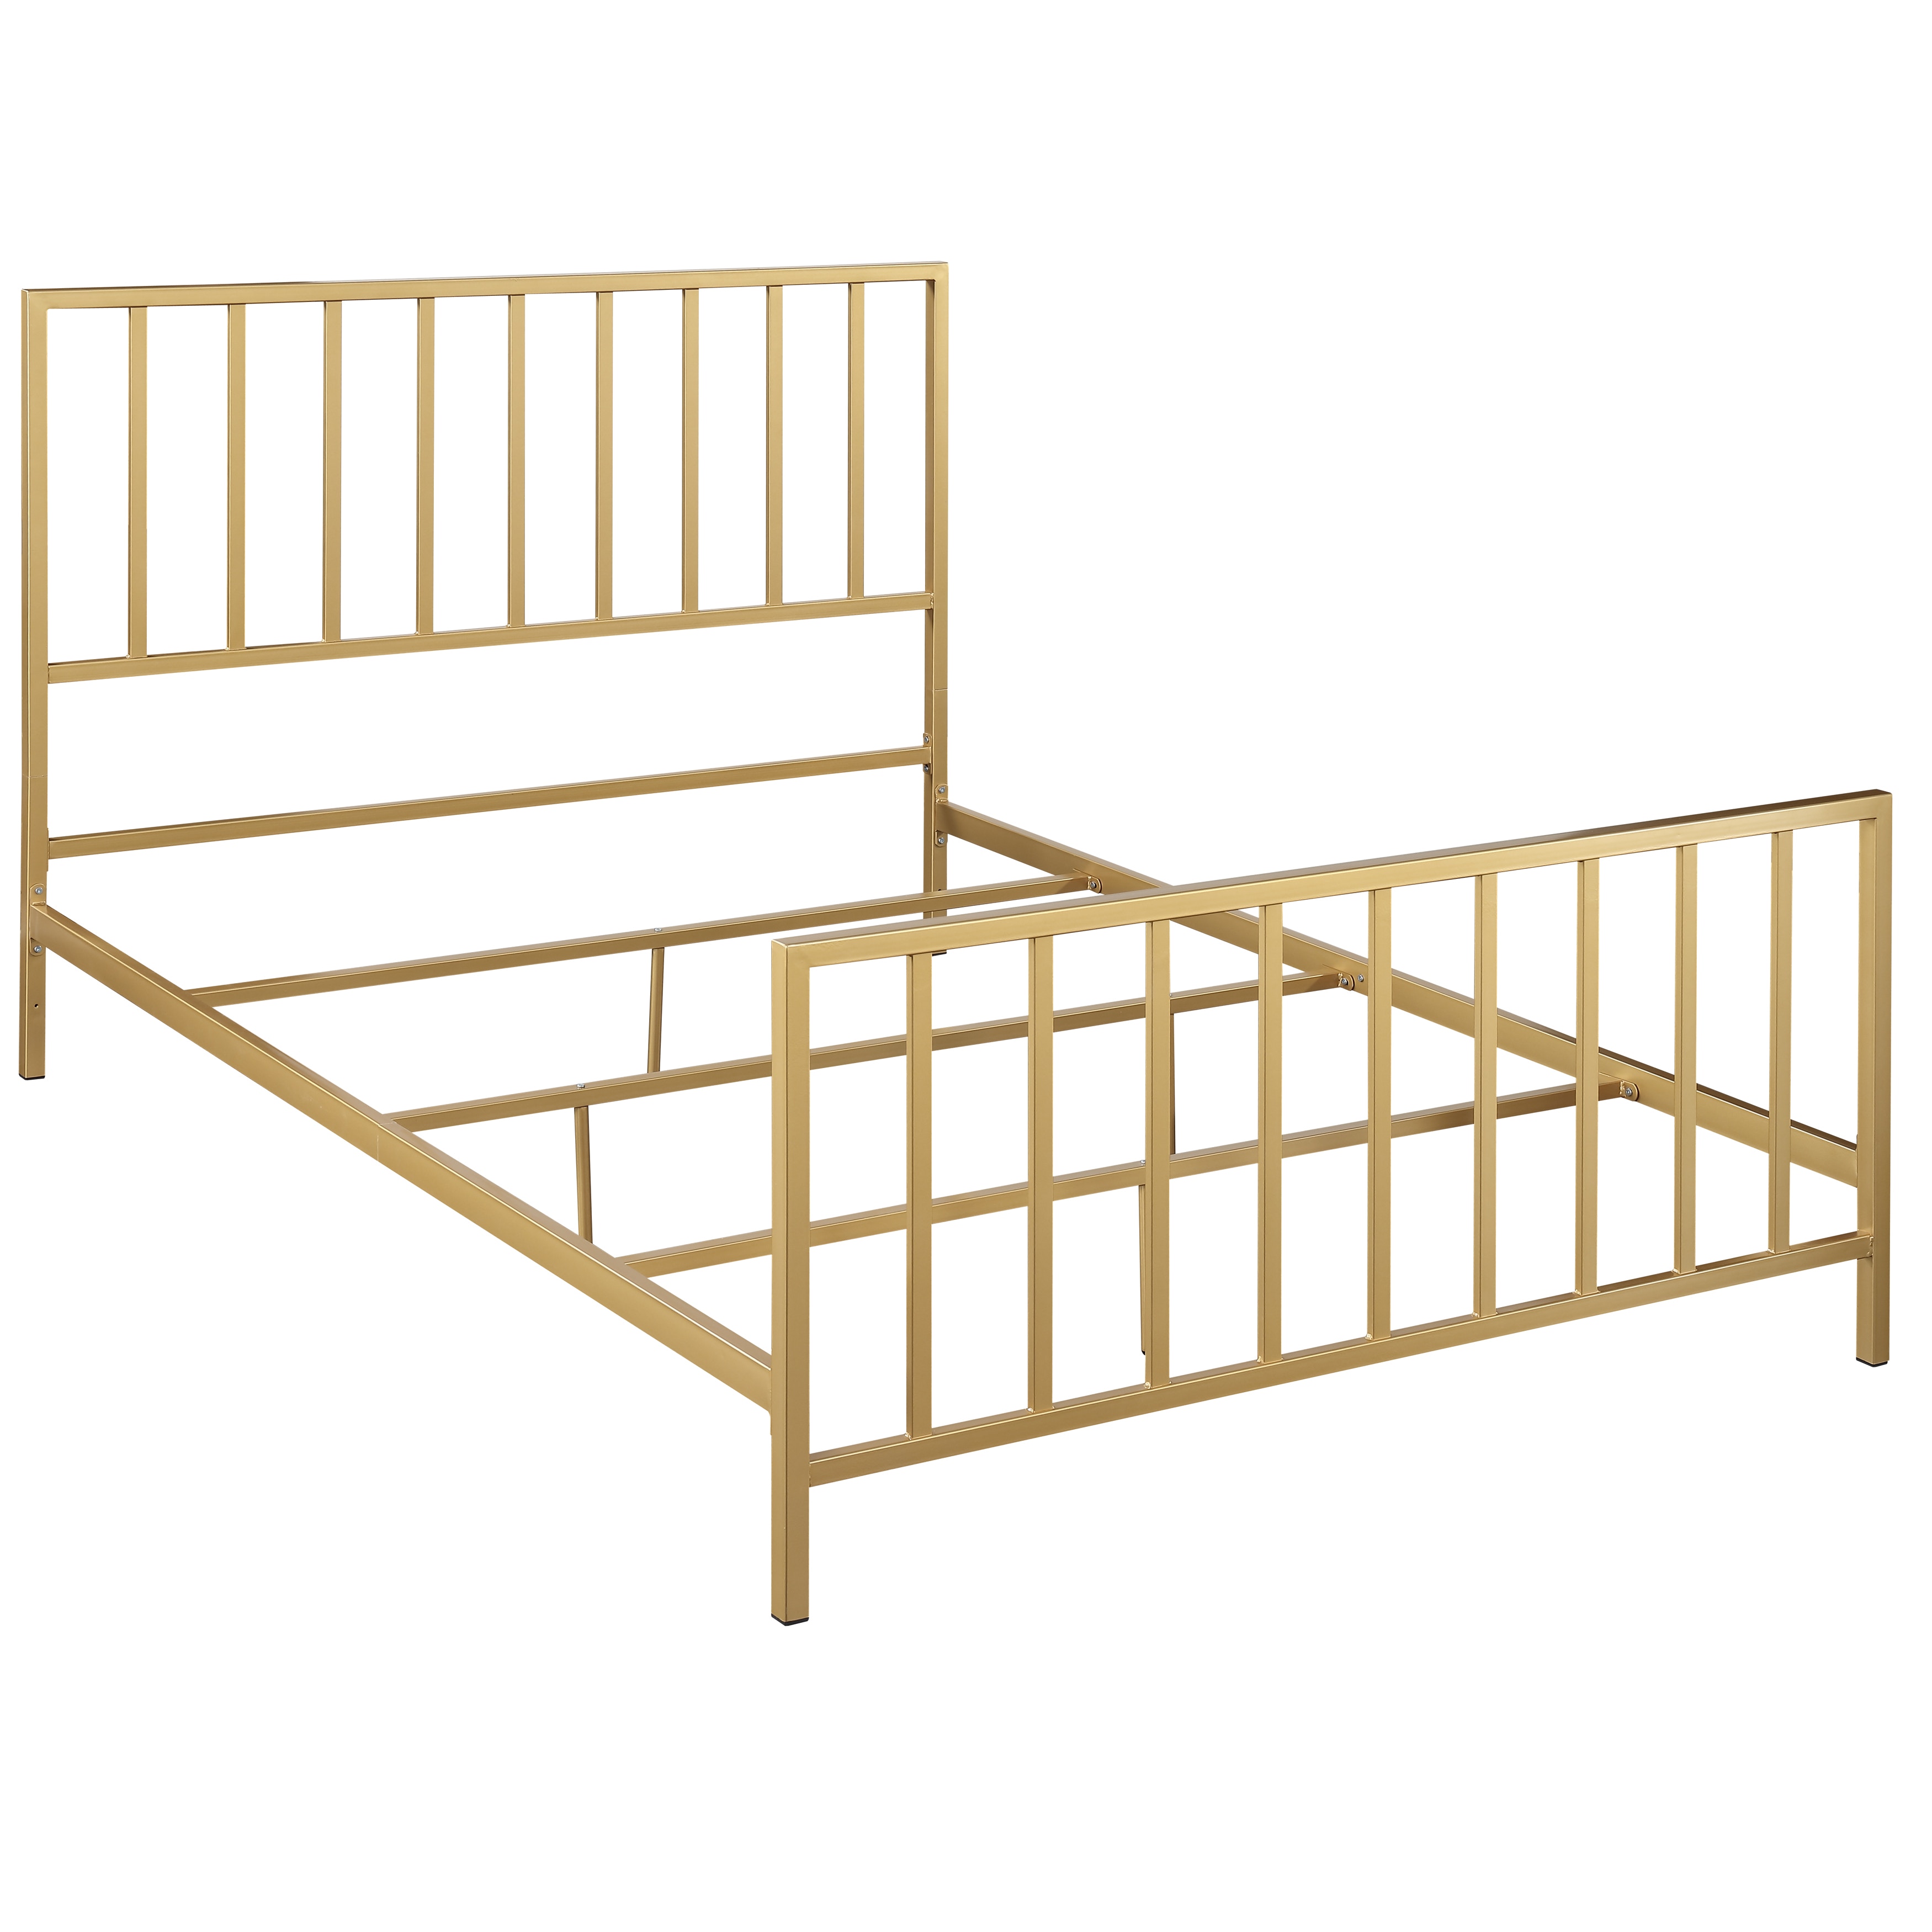 ACH Bedroom Slat Style Queen Metal Bed in Brushed Gold DS-D170-290 